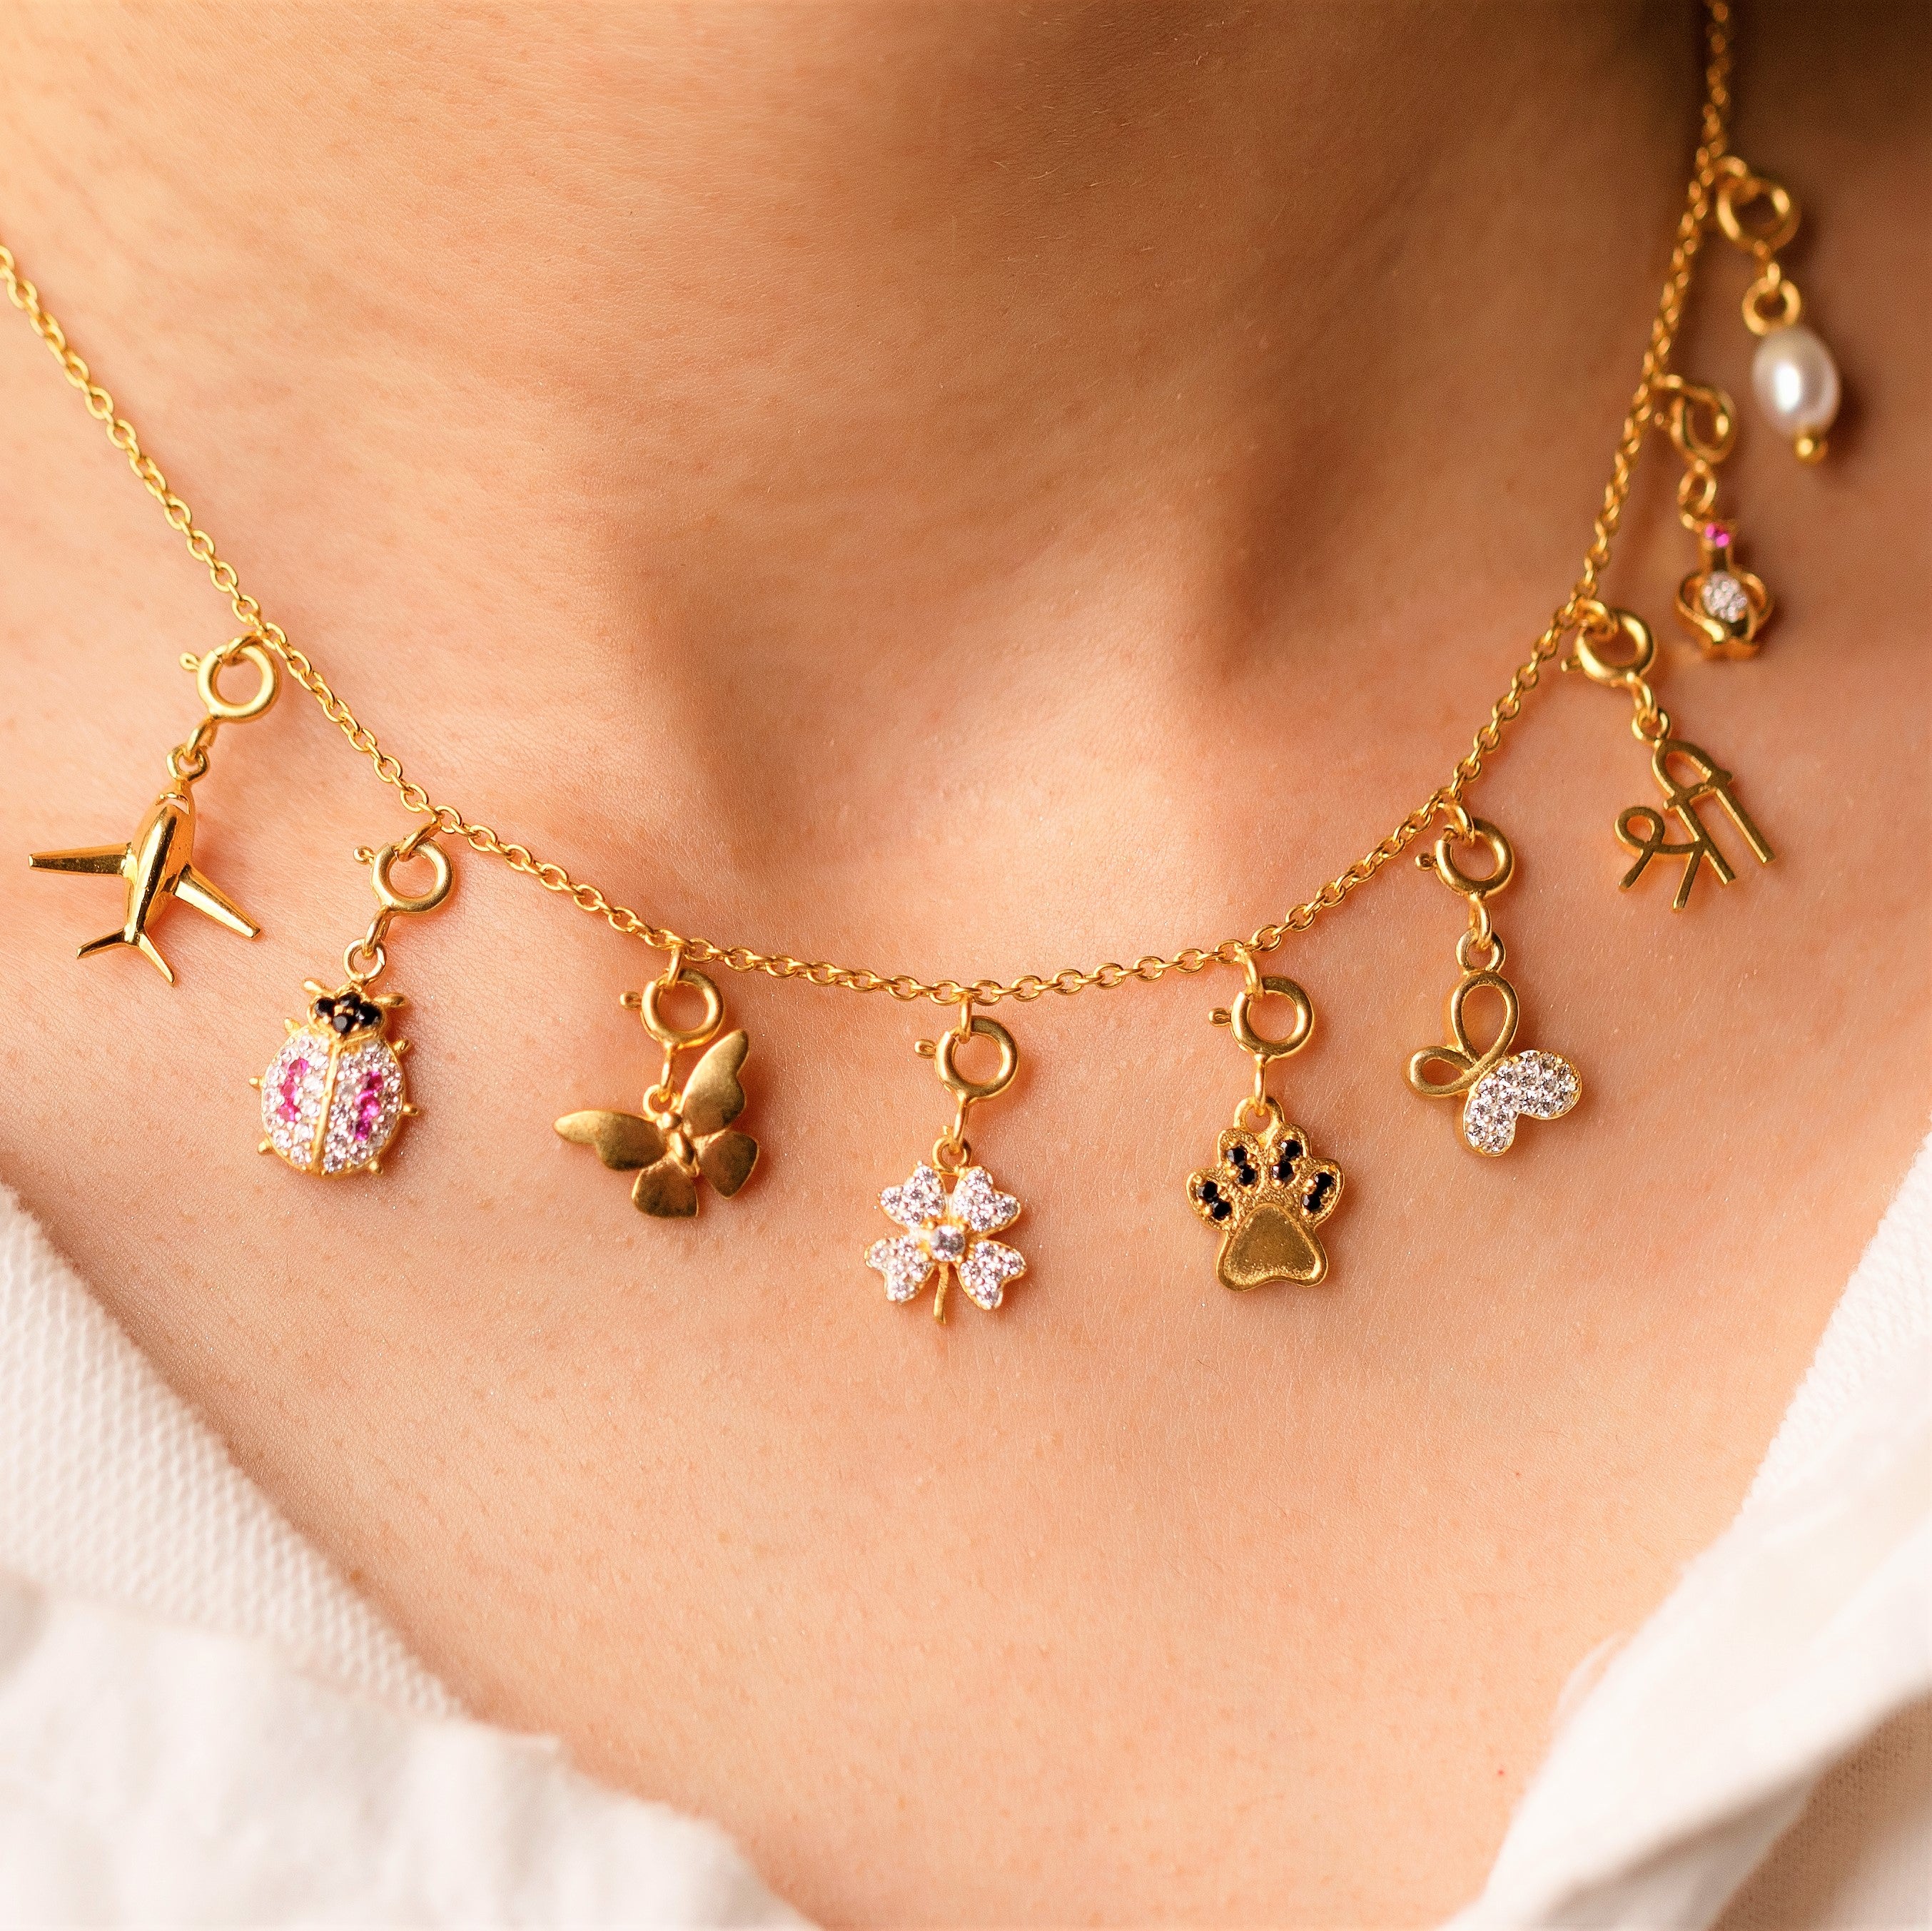 Lucky Charms | Charm Necklace by Jaimie Nicole Jewelry